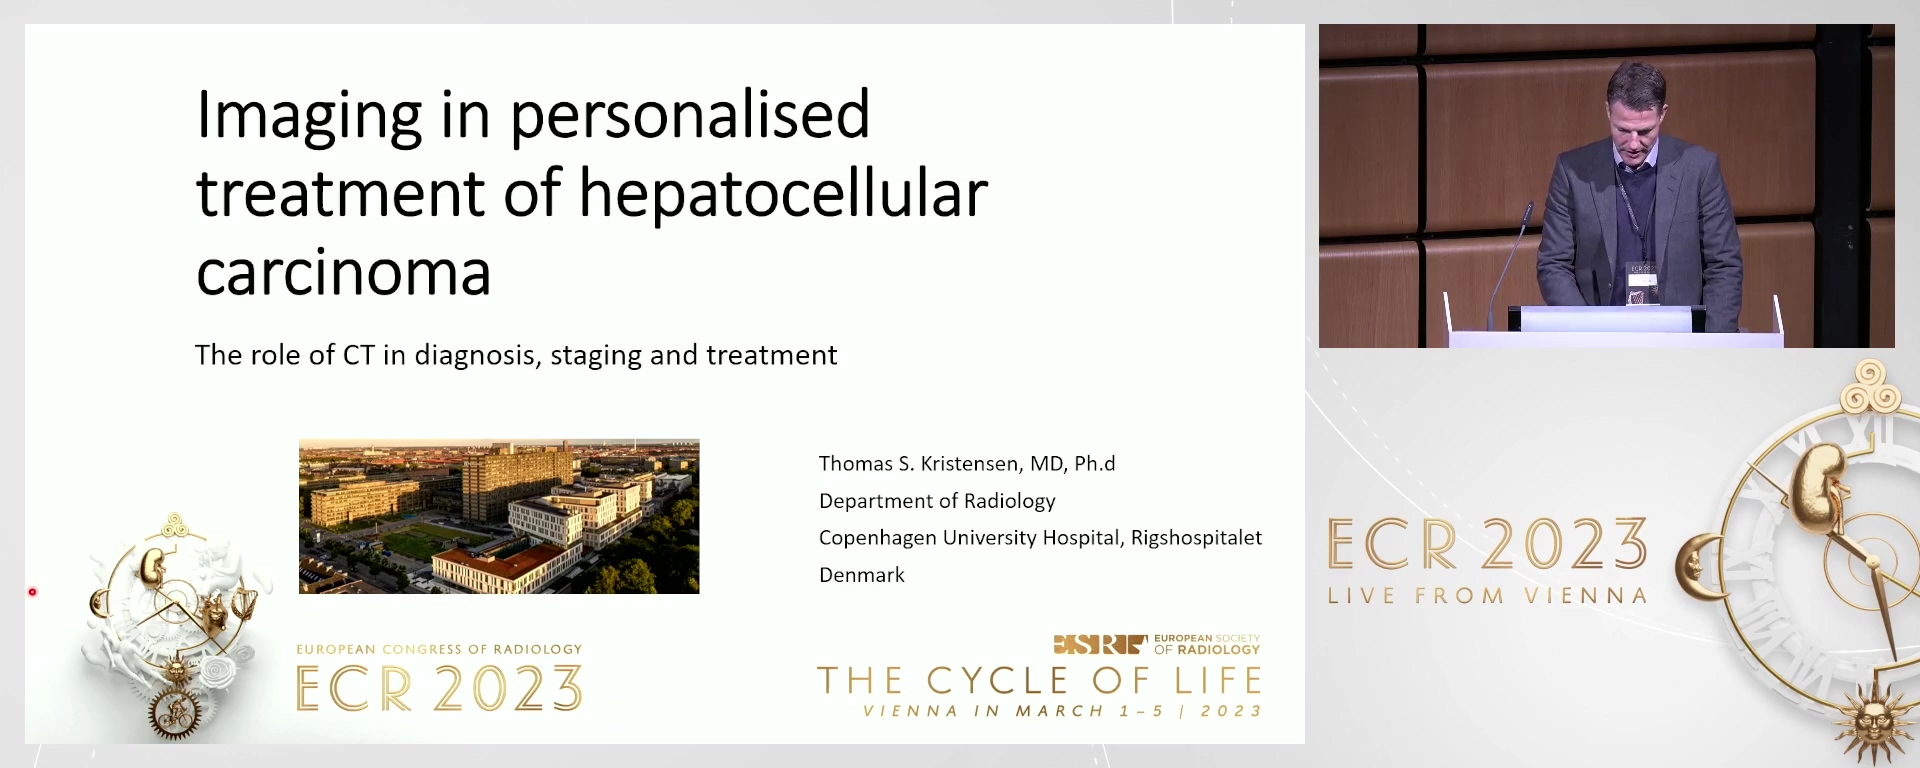 The role of CT in diagnosis, staging, and treatment - Thomas Skaarup Kristensen, Copenhagen / DK